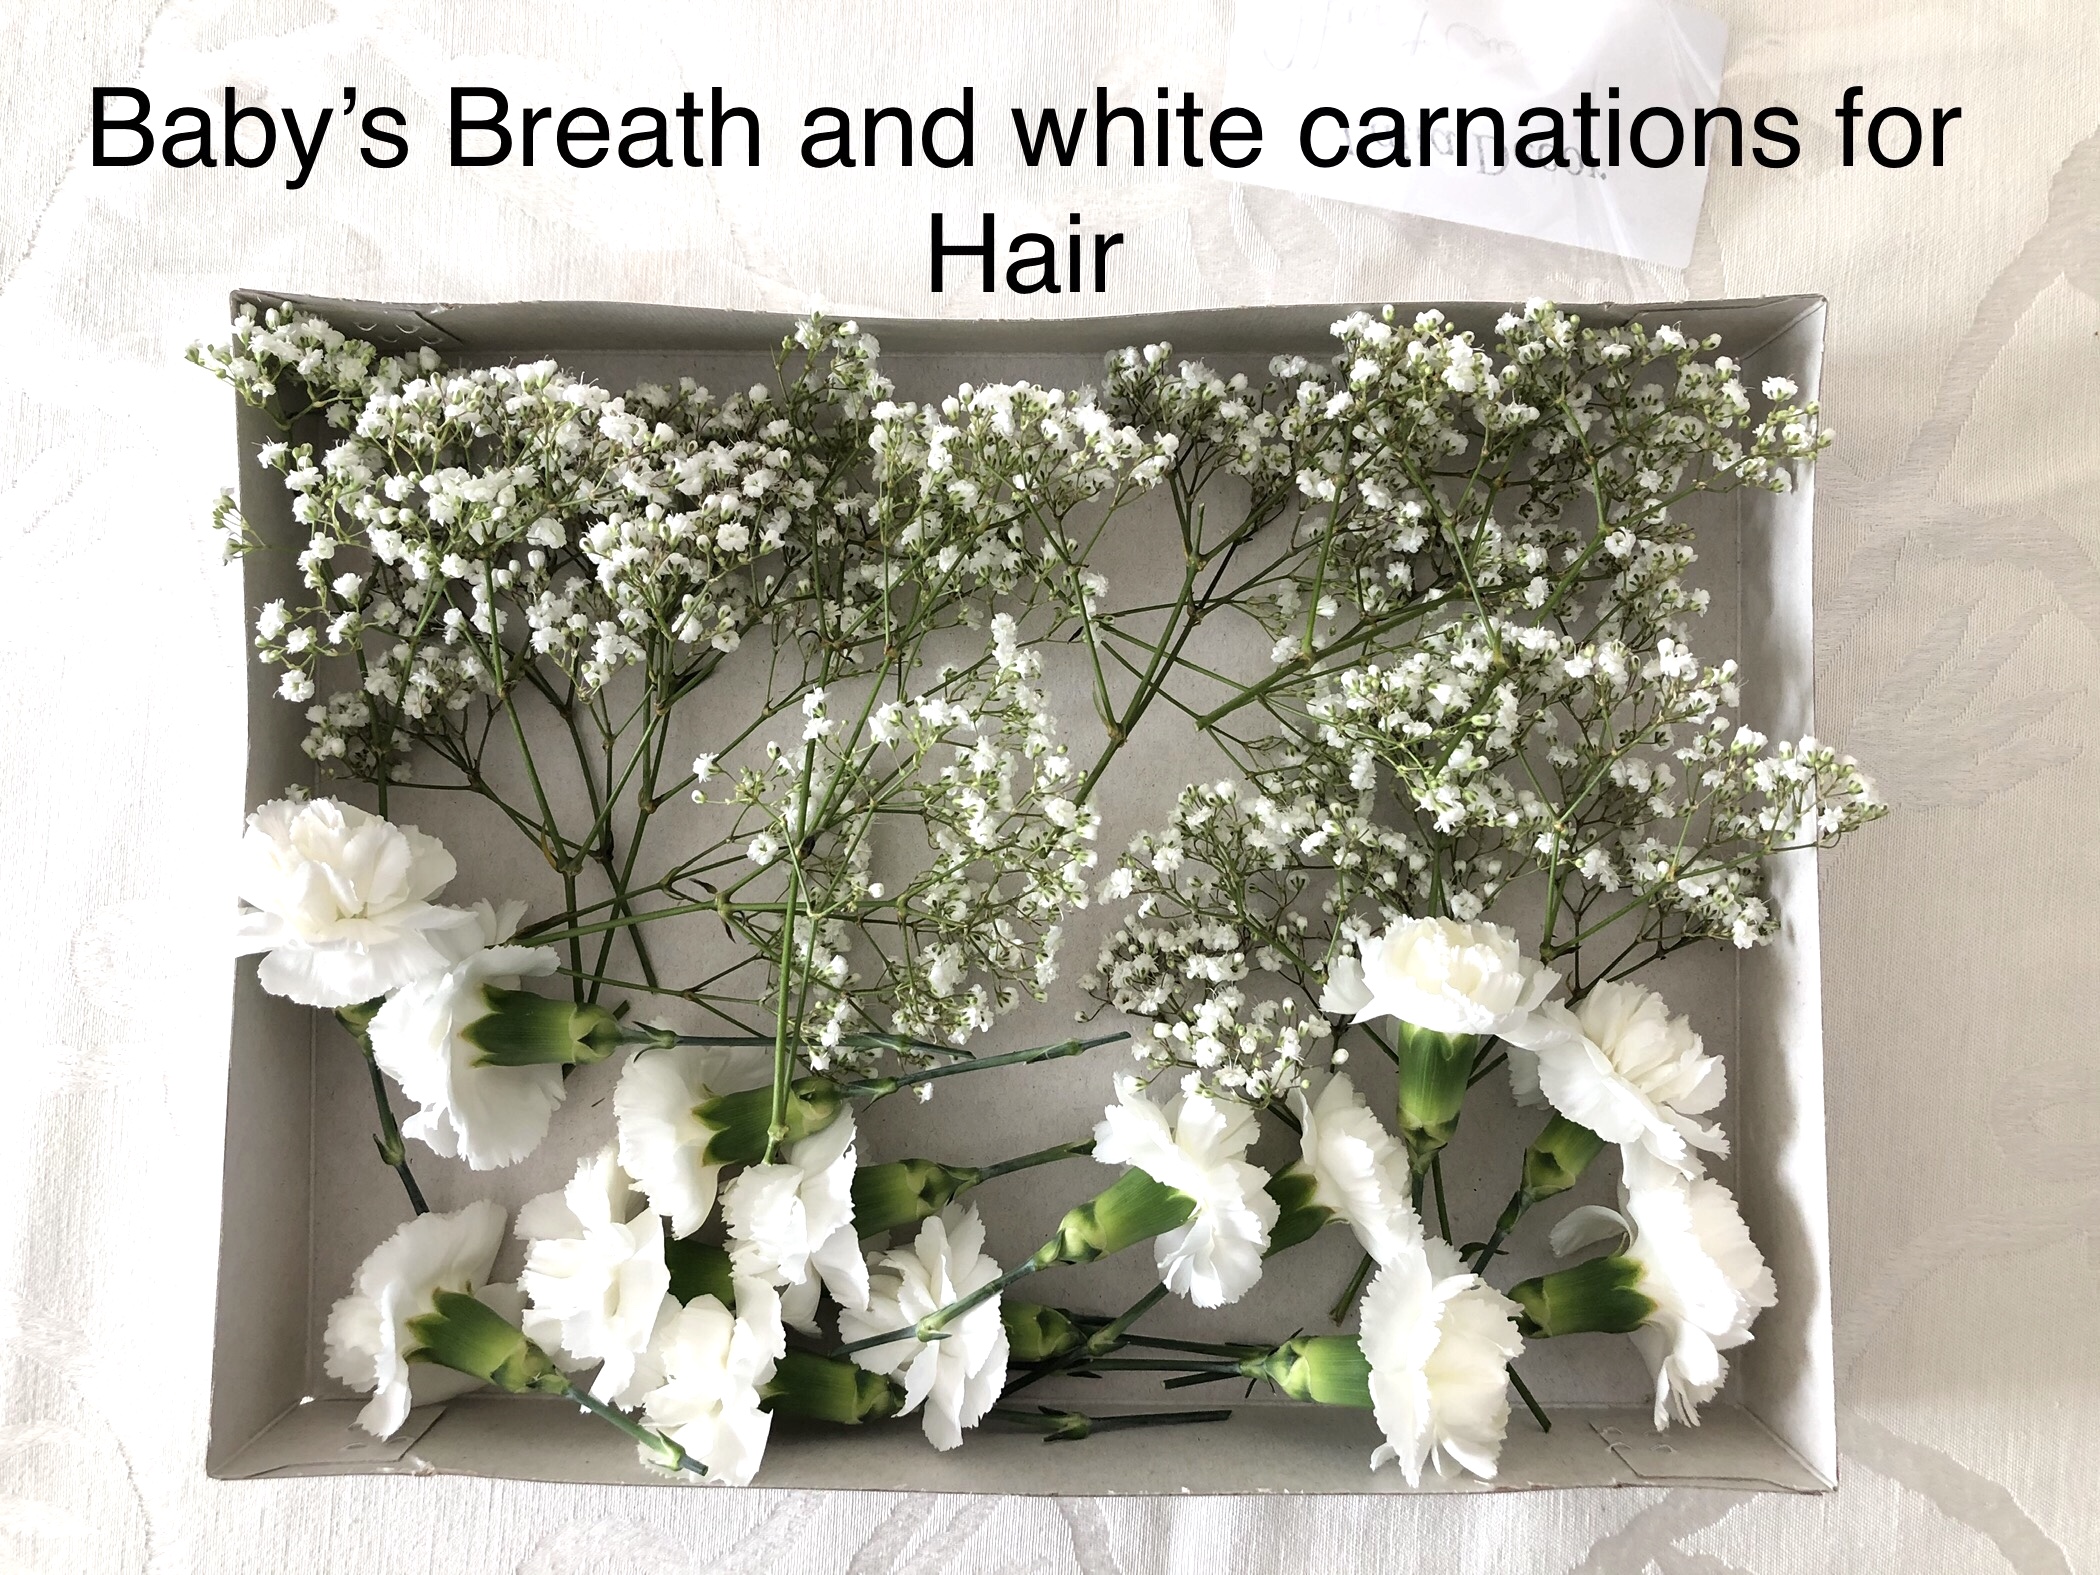 $15  Babies breath and carnations for hair 